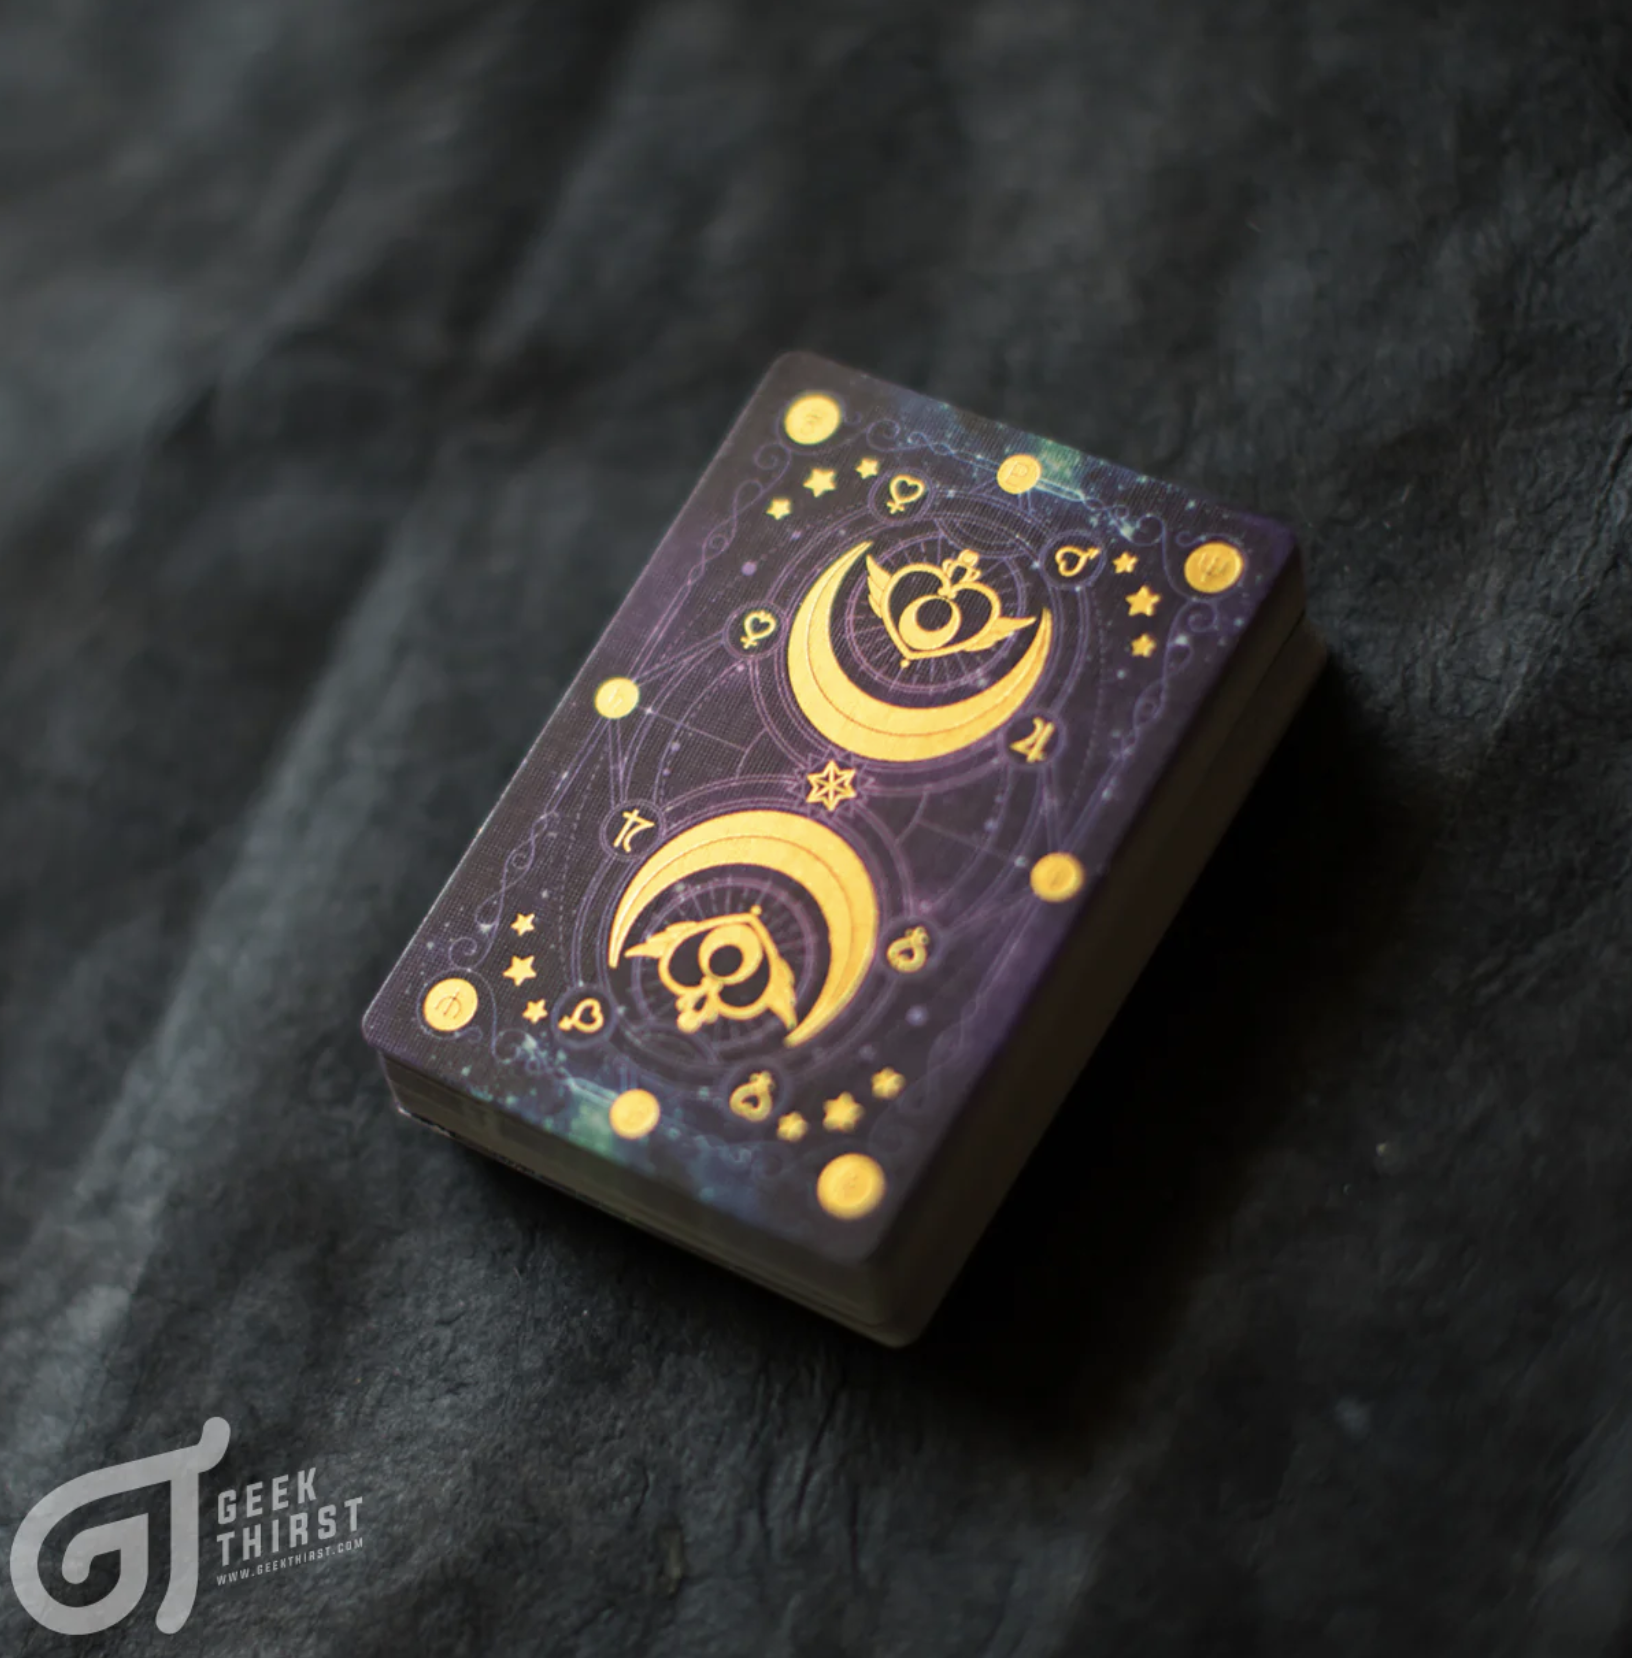 Sailor Moon-themed deck of cards